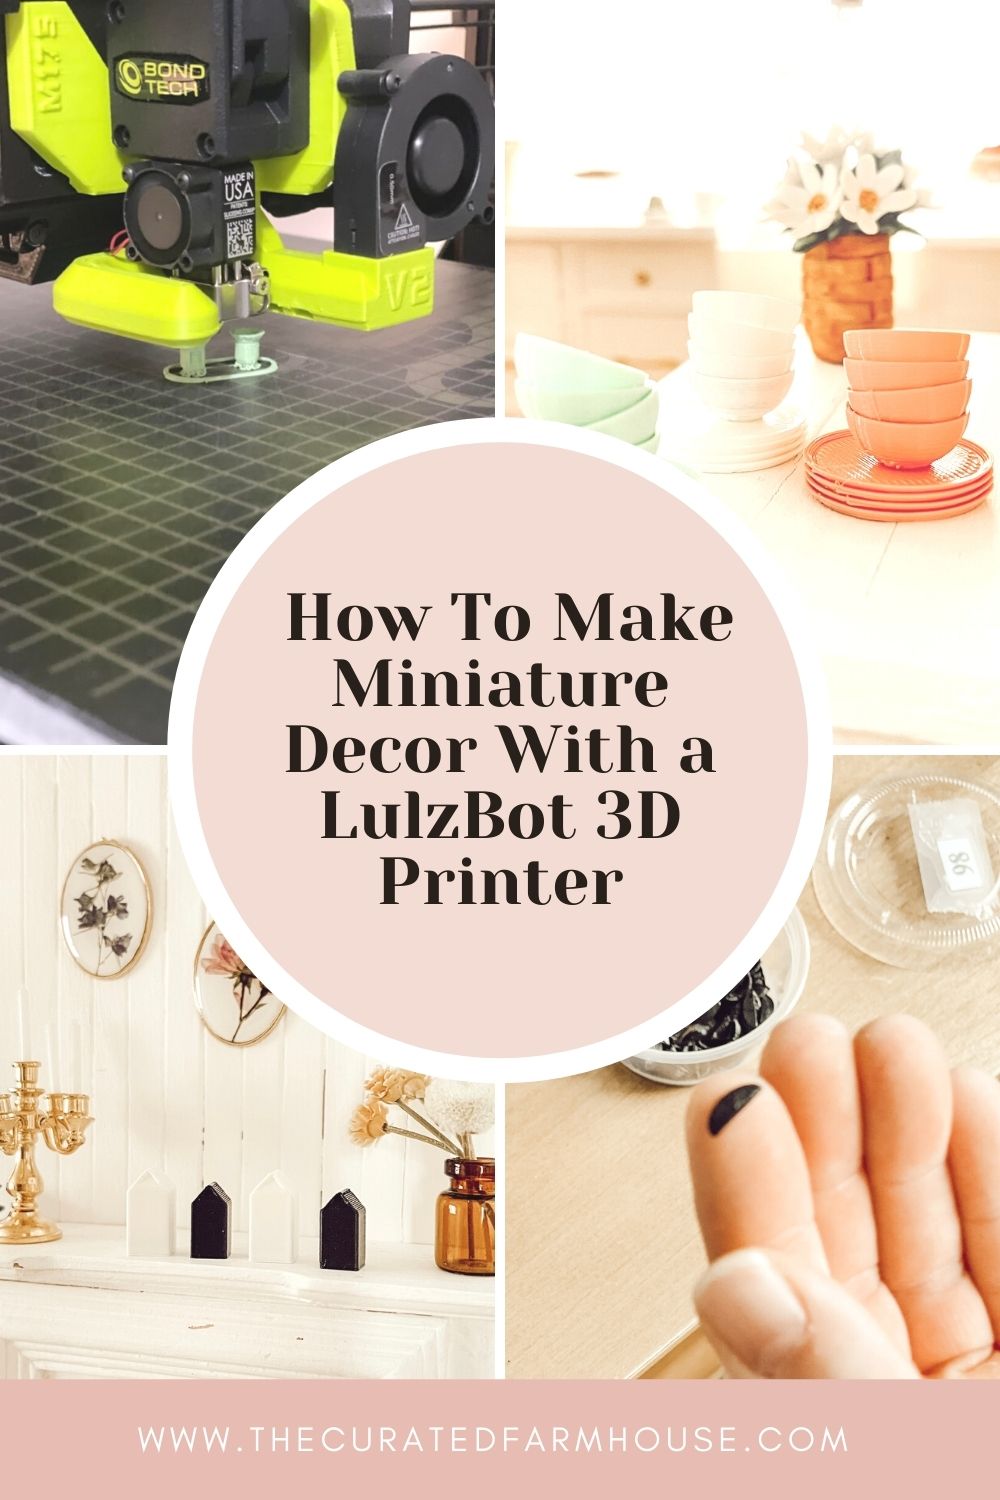 How To Make Miniature Decor With a LulzBot 3D Printer